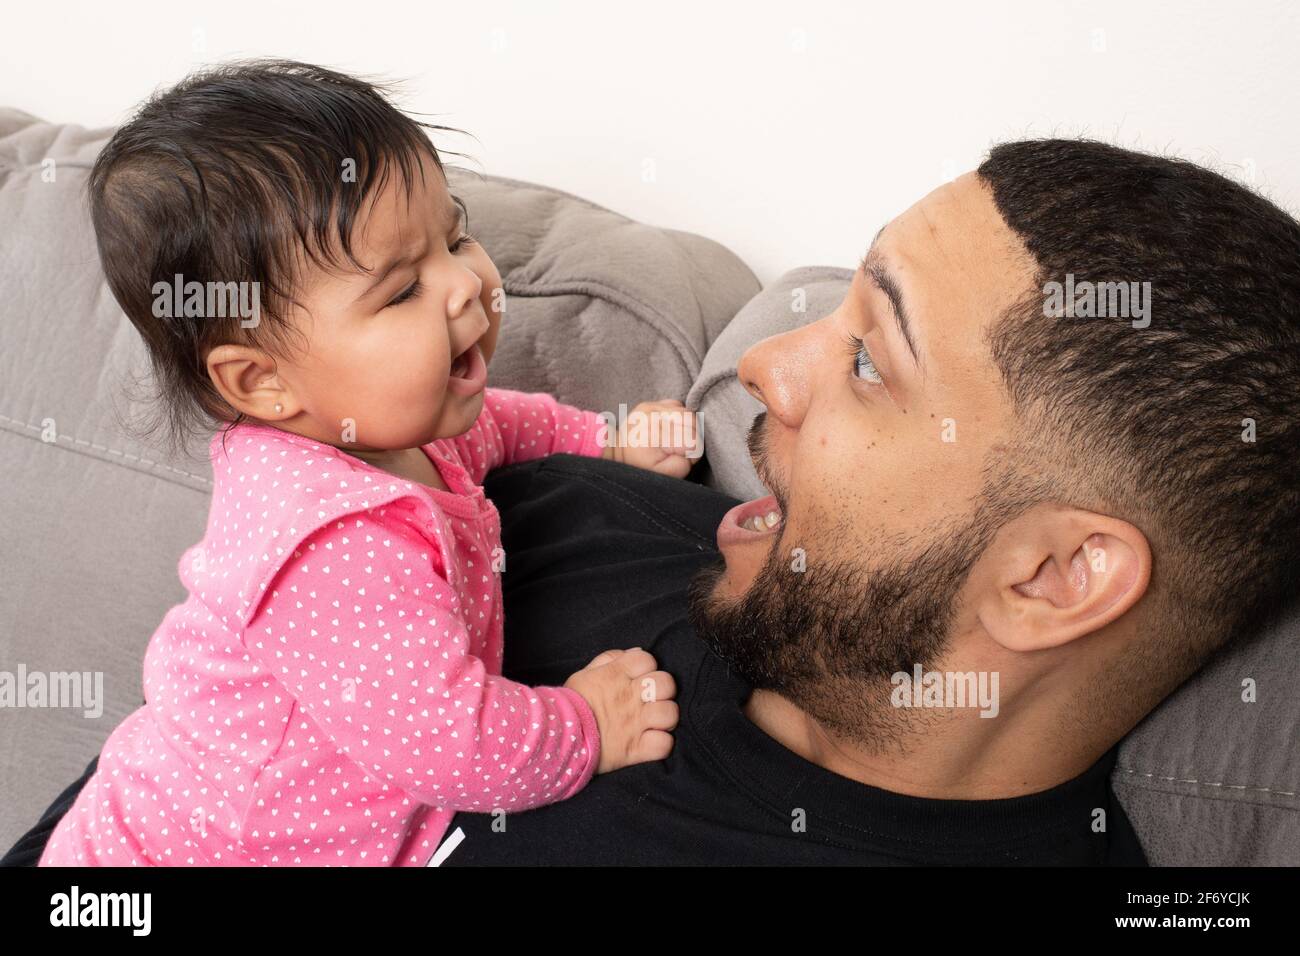 Father holding and interacting with 4 month old baby girl, matching expressions Stock Photo